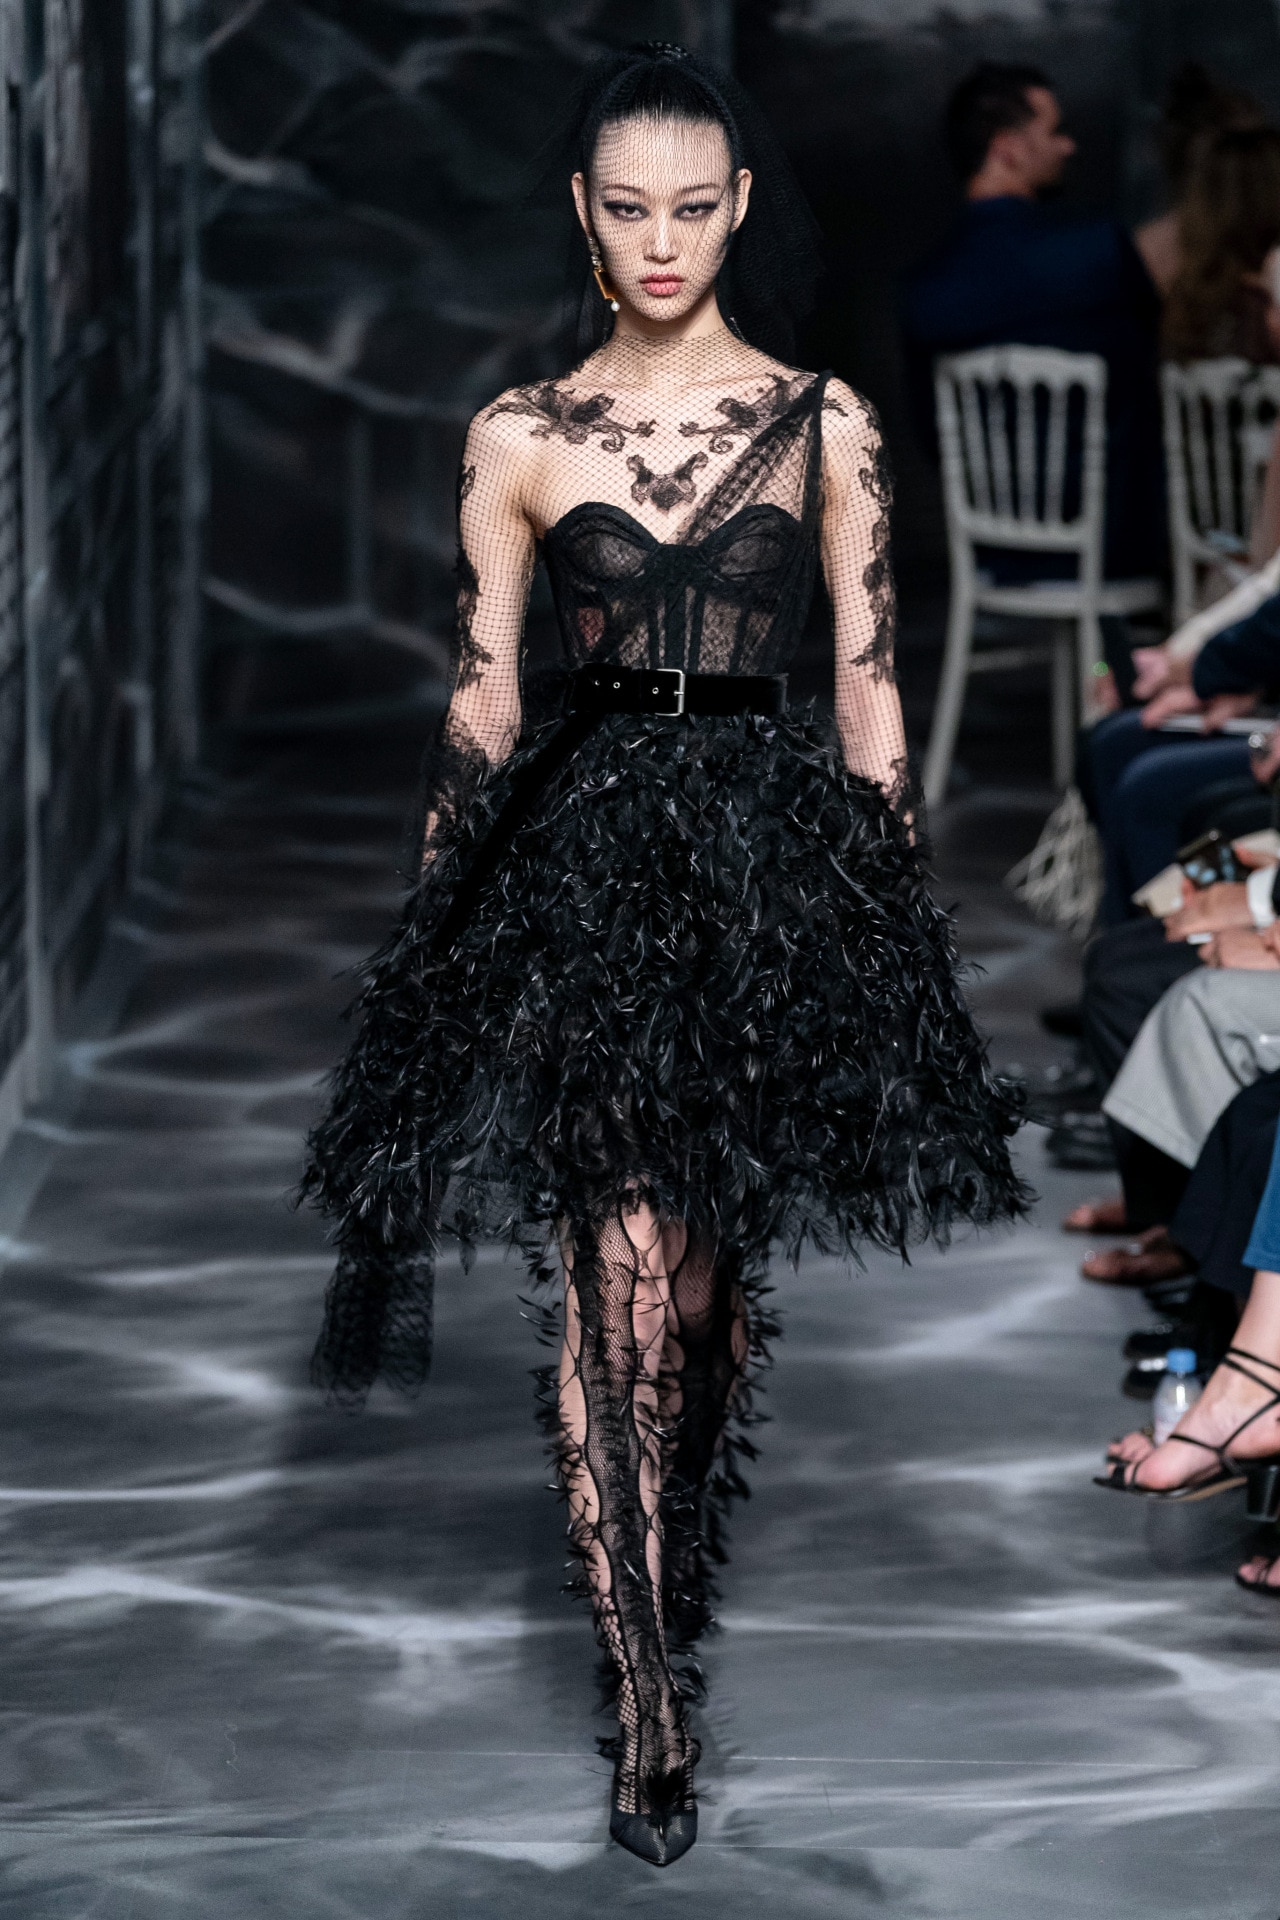 John Galliano Collection Shown in Paris Amid 'Surreal' Atmosphere